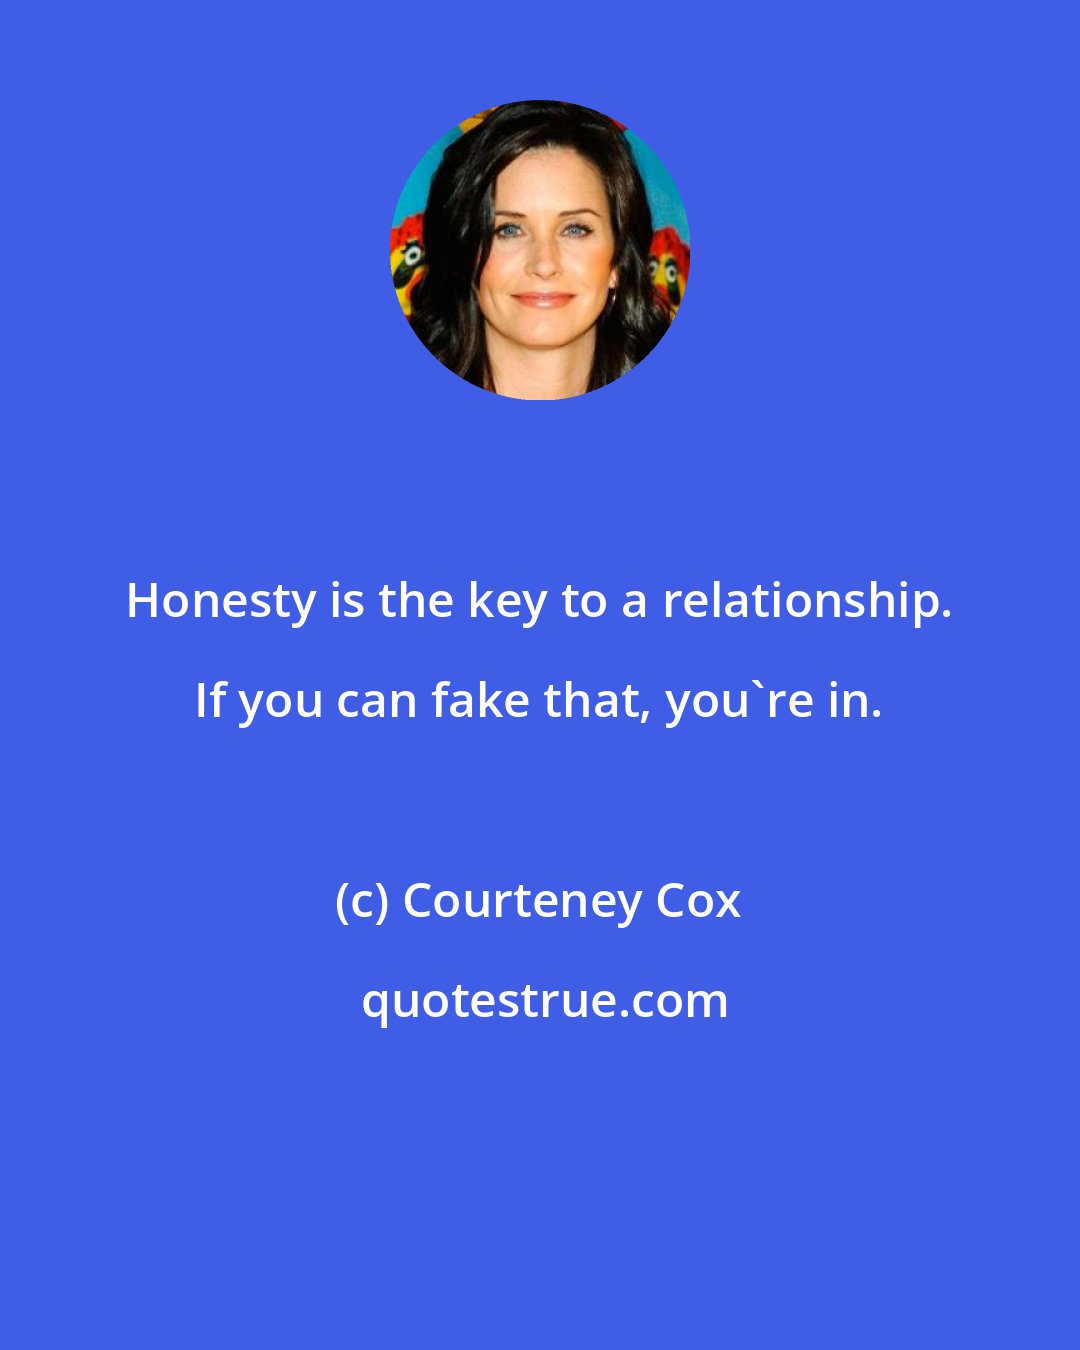 Courteney Cox: Honesty is the key to a relationship. If you can fake that, you're in.